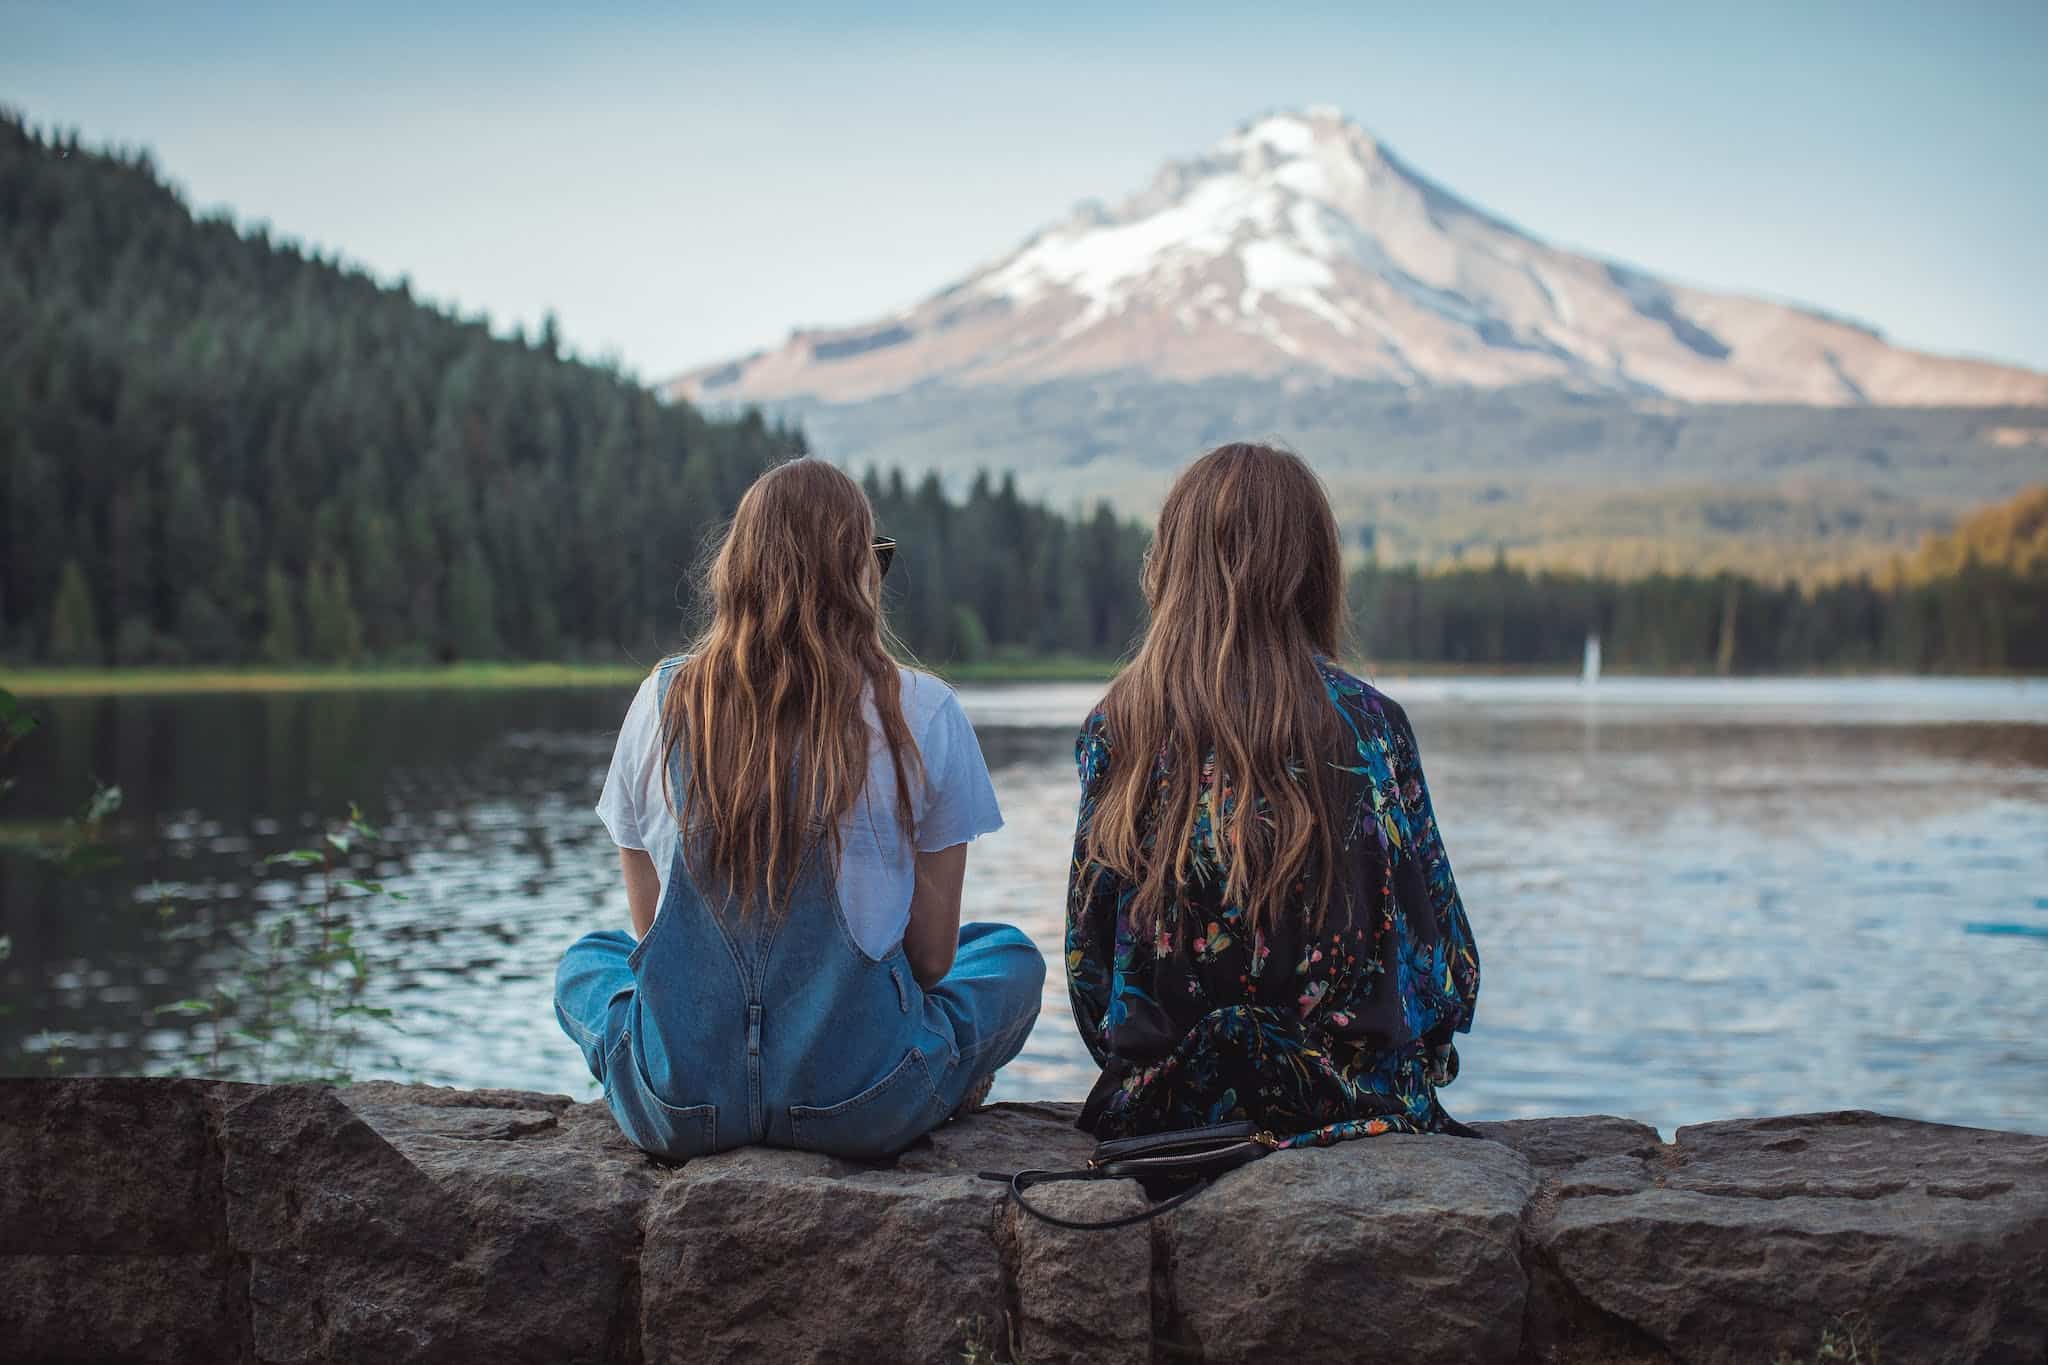 Two Women Sitting on Rock Facing on Body of Water and Mountain in oregon